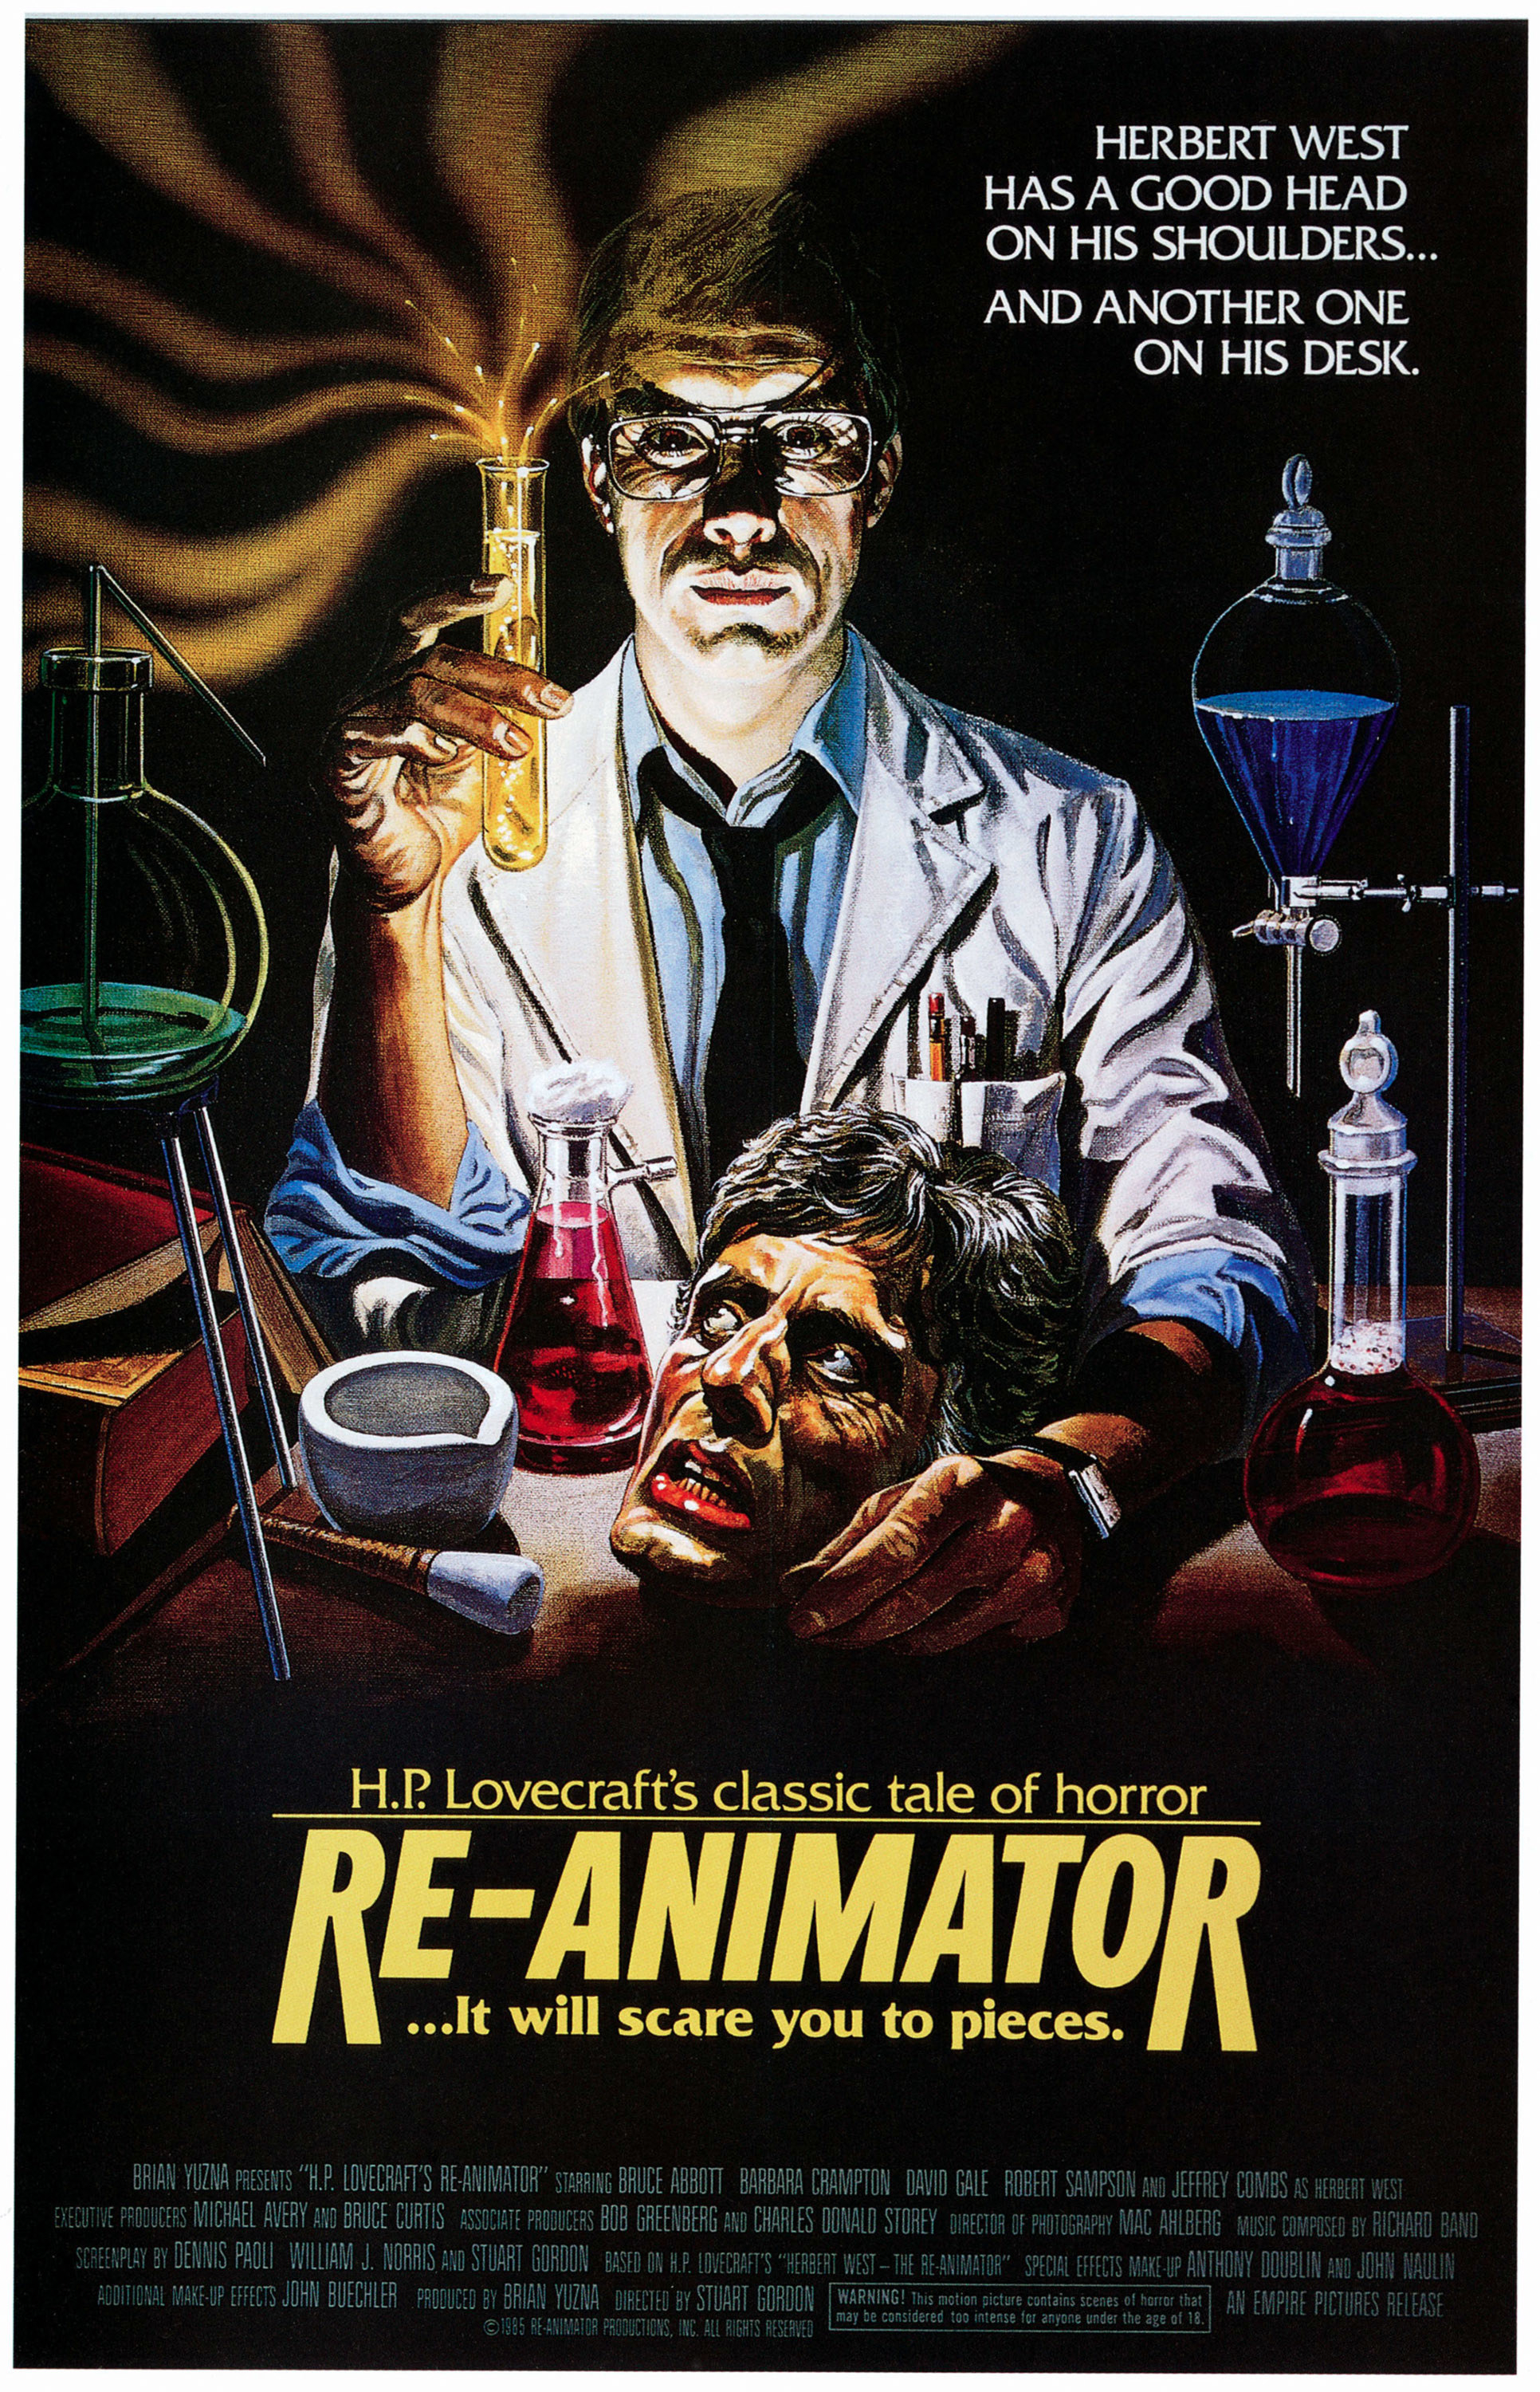 The official poster for &quot;Re-Animator&quot; which features a scientist in a lab clutching a disembodied head with text reading, &quot;Herbert West has a good head on his shoulders and another one on his desk&quot;